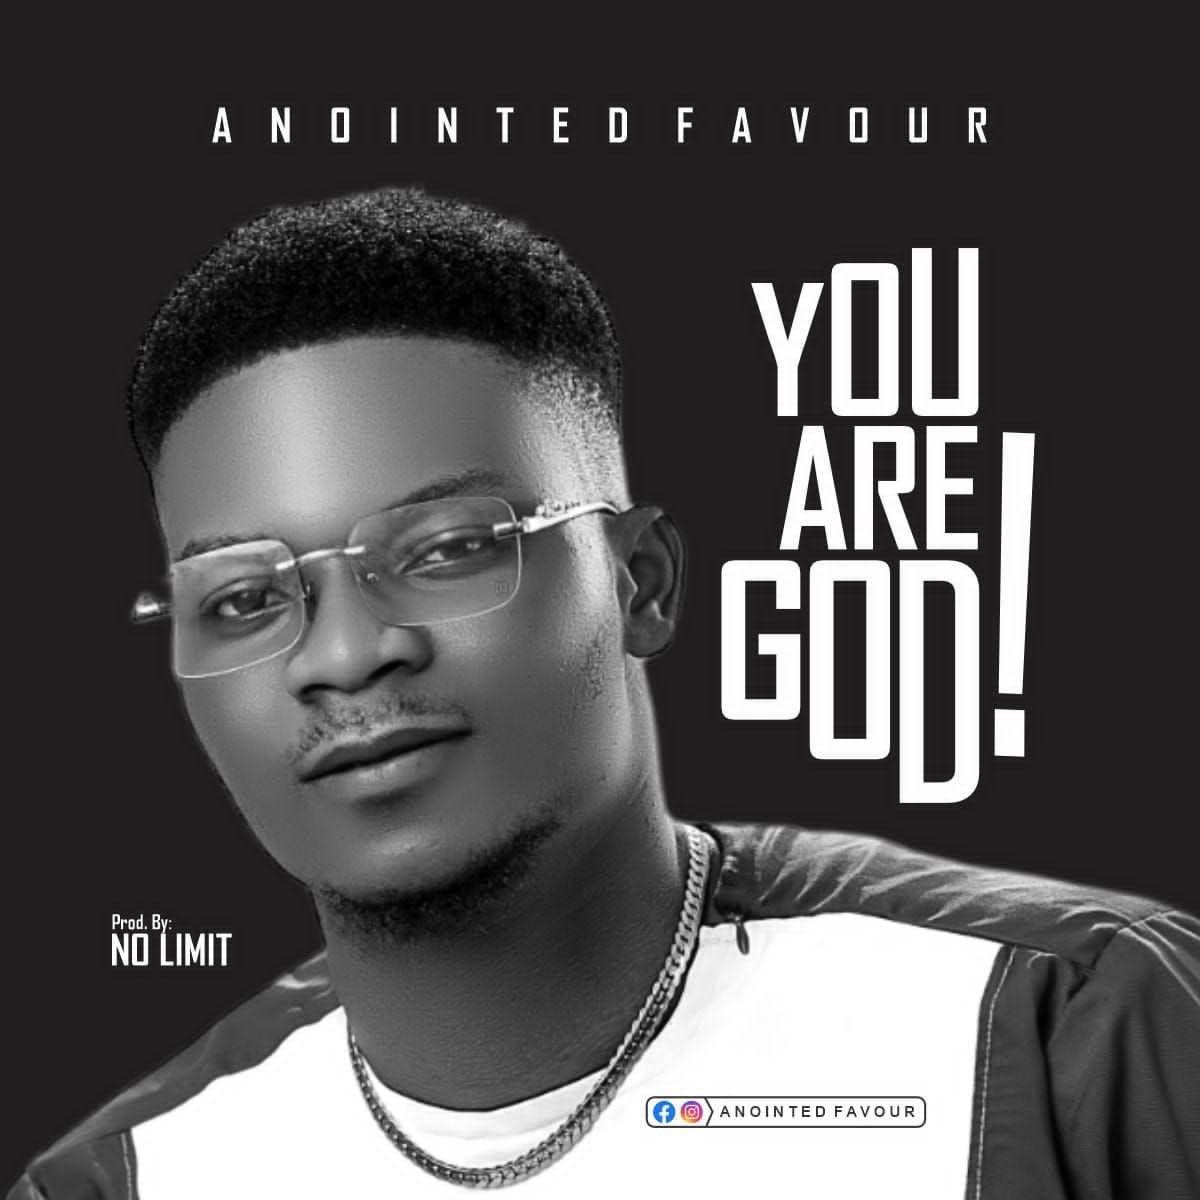 TMAQTALK MUSIC: Anointed Favour - You Are God